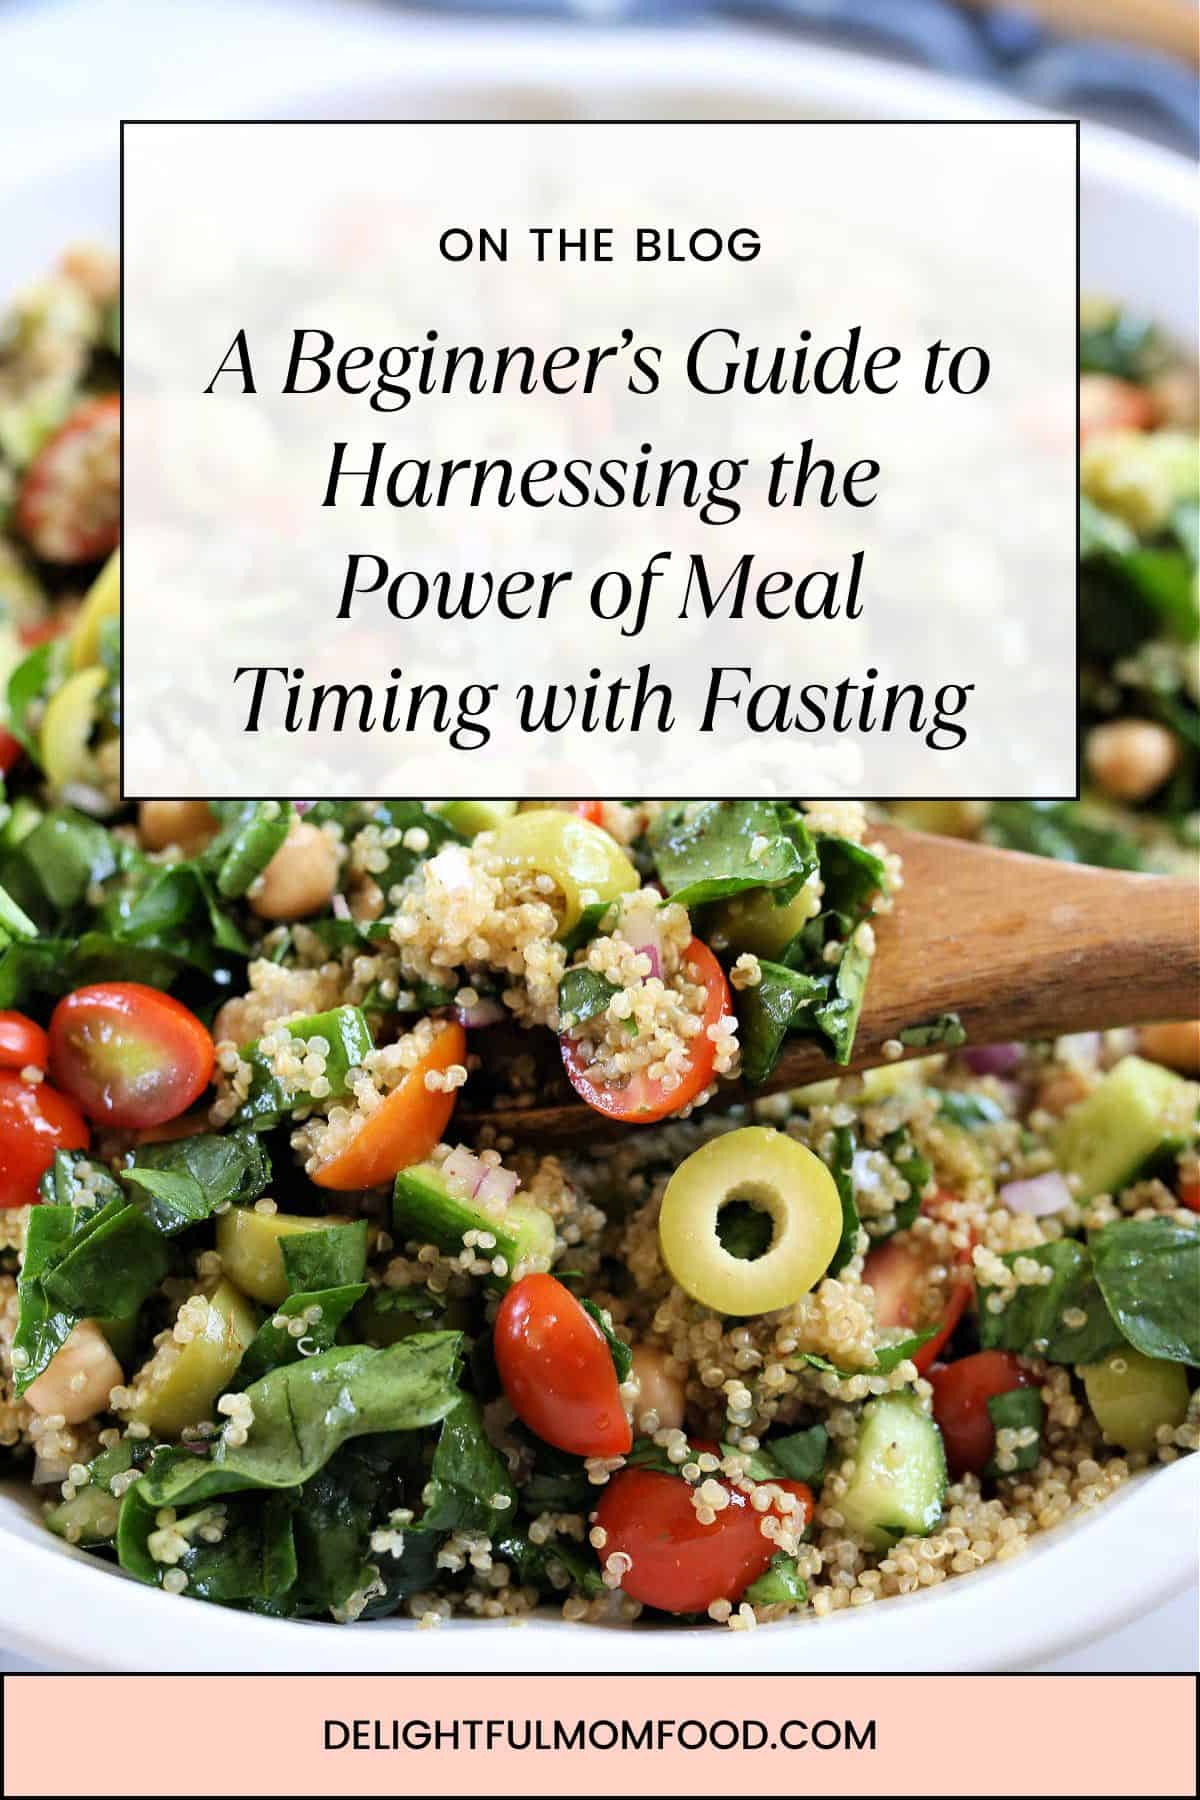 Beginners guide to fasting.